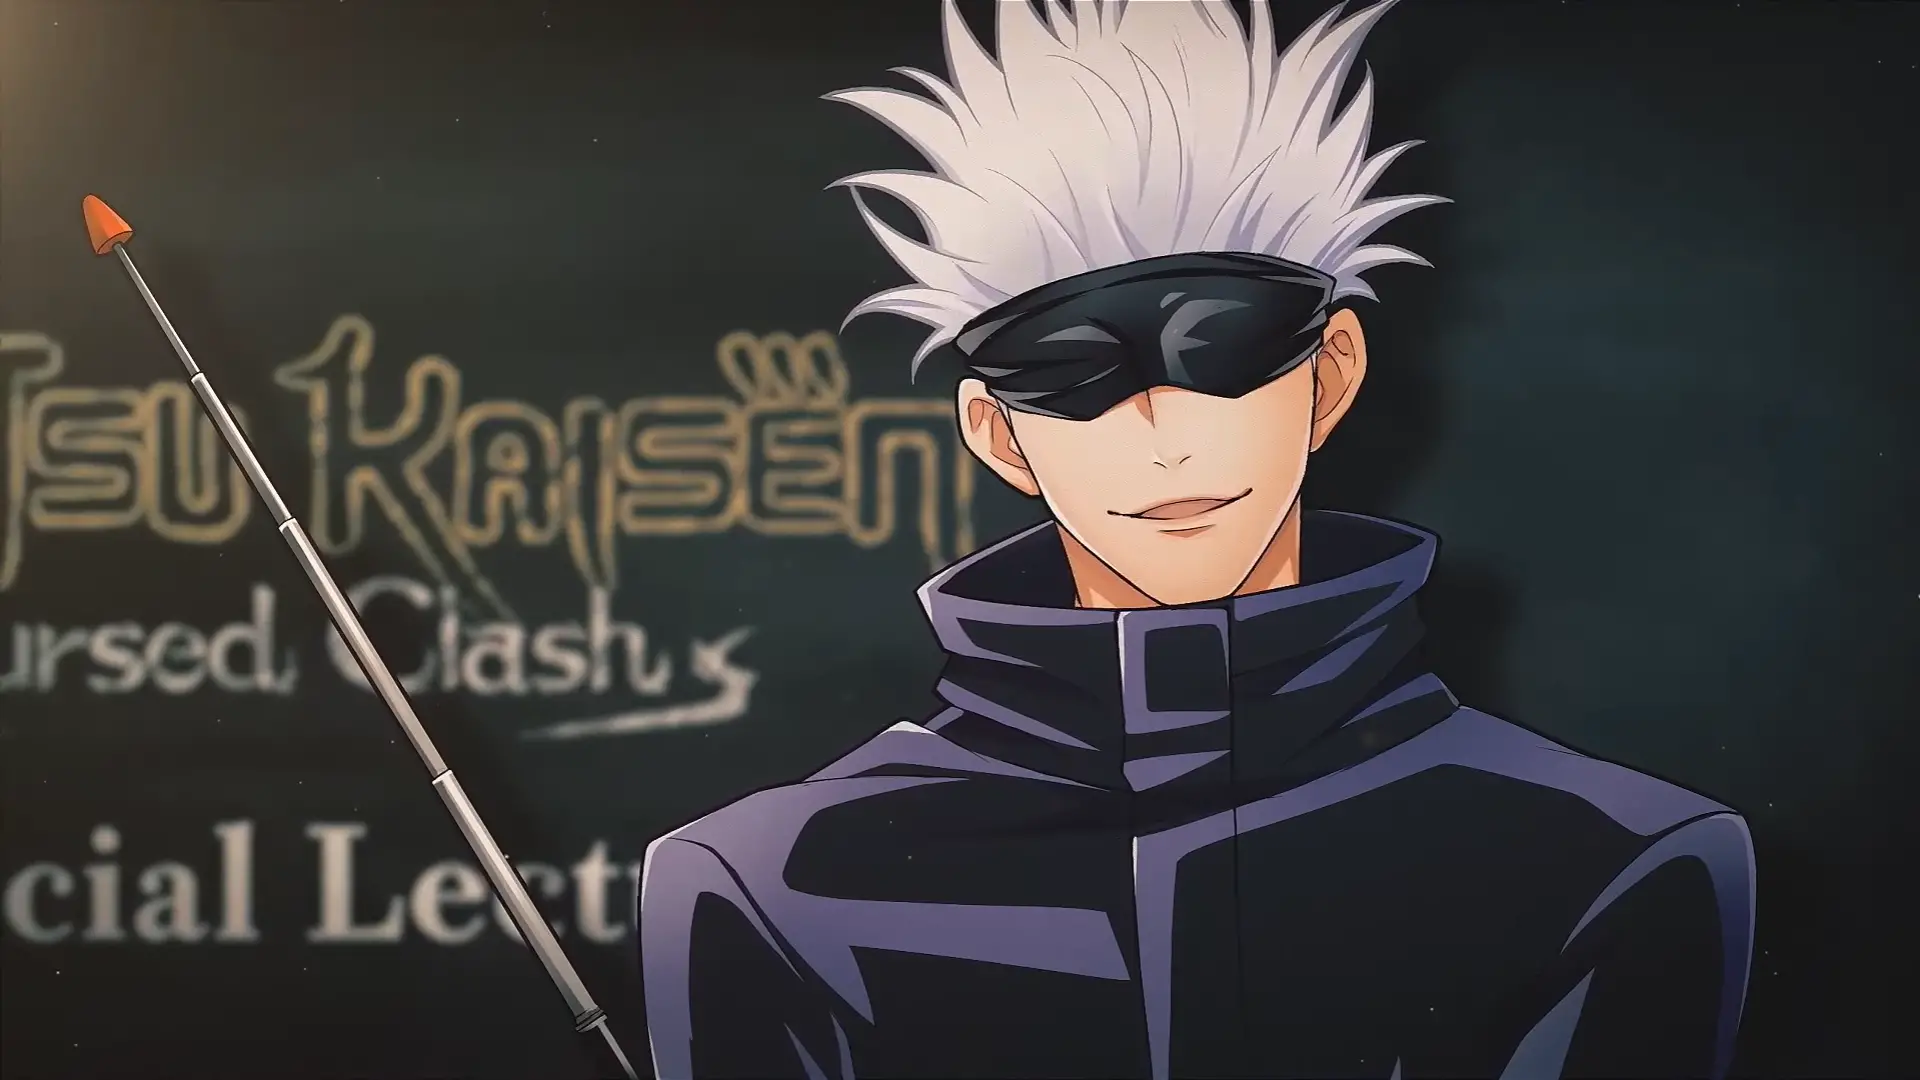 New Jujutsu Kaisen Cursed Clash Trailer Explains Gameplay Features, Including Relationship Chart